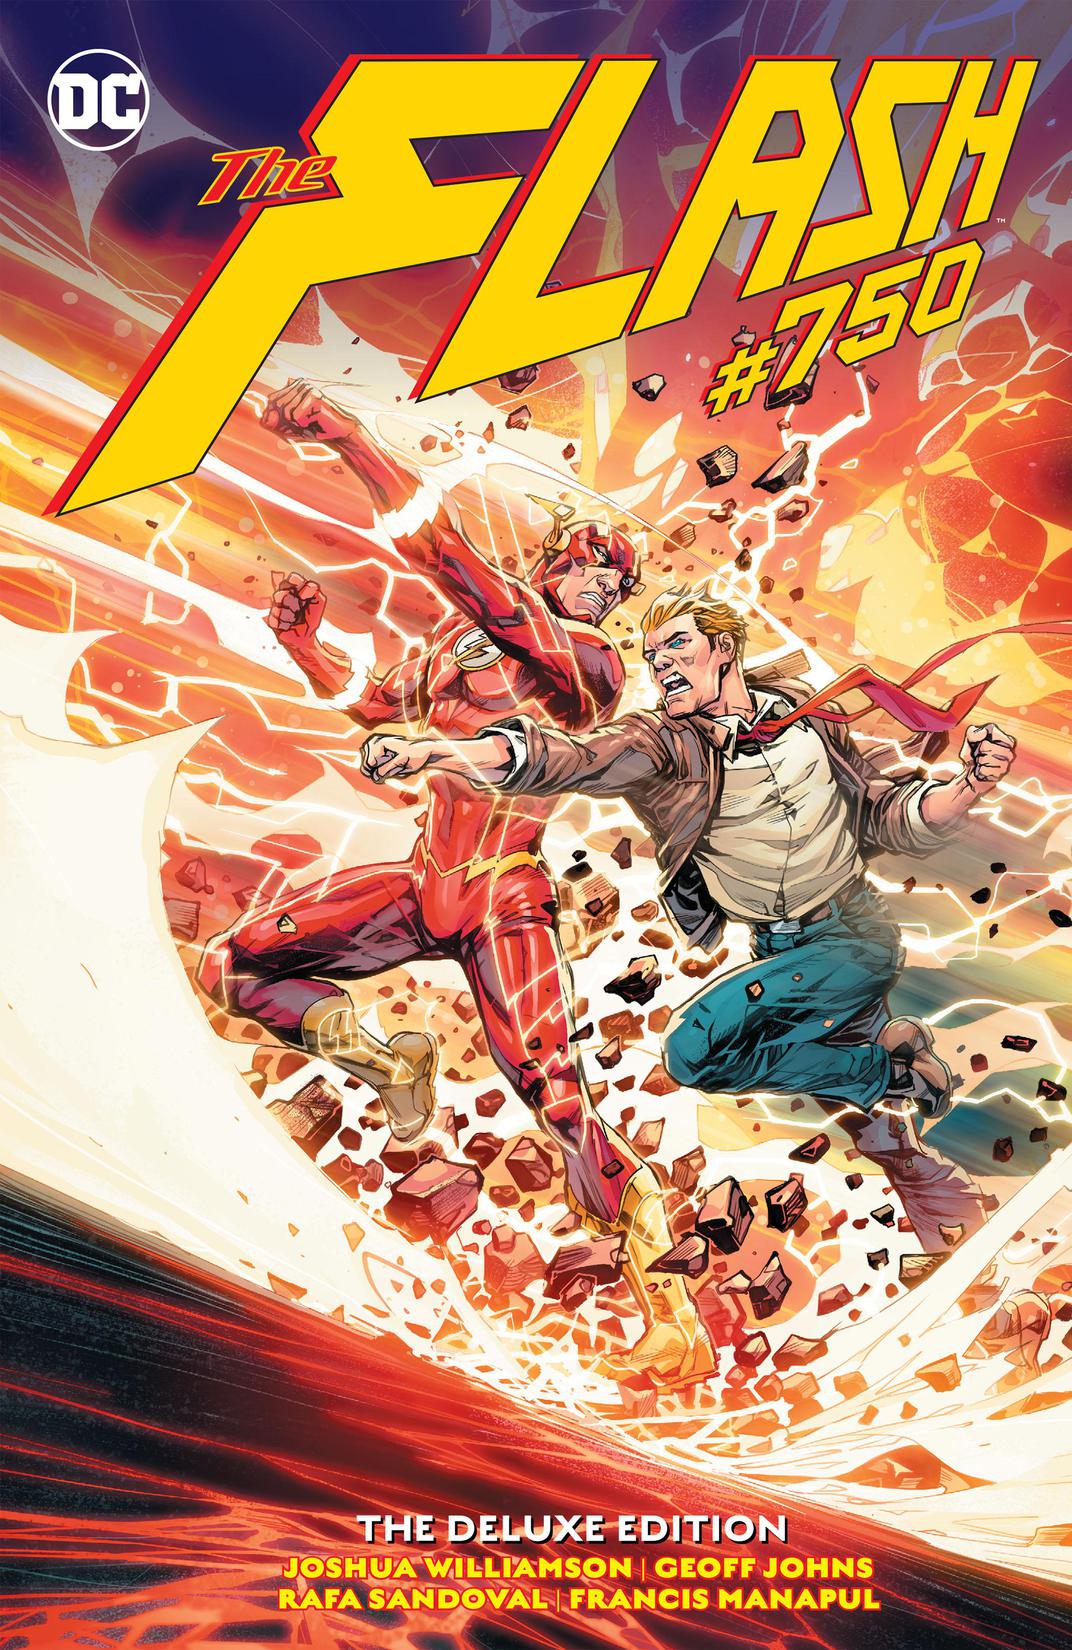 The Flash #750 Deluxe Edition preview images